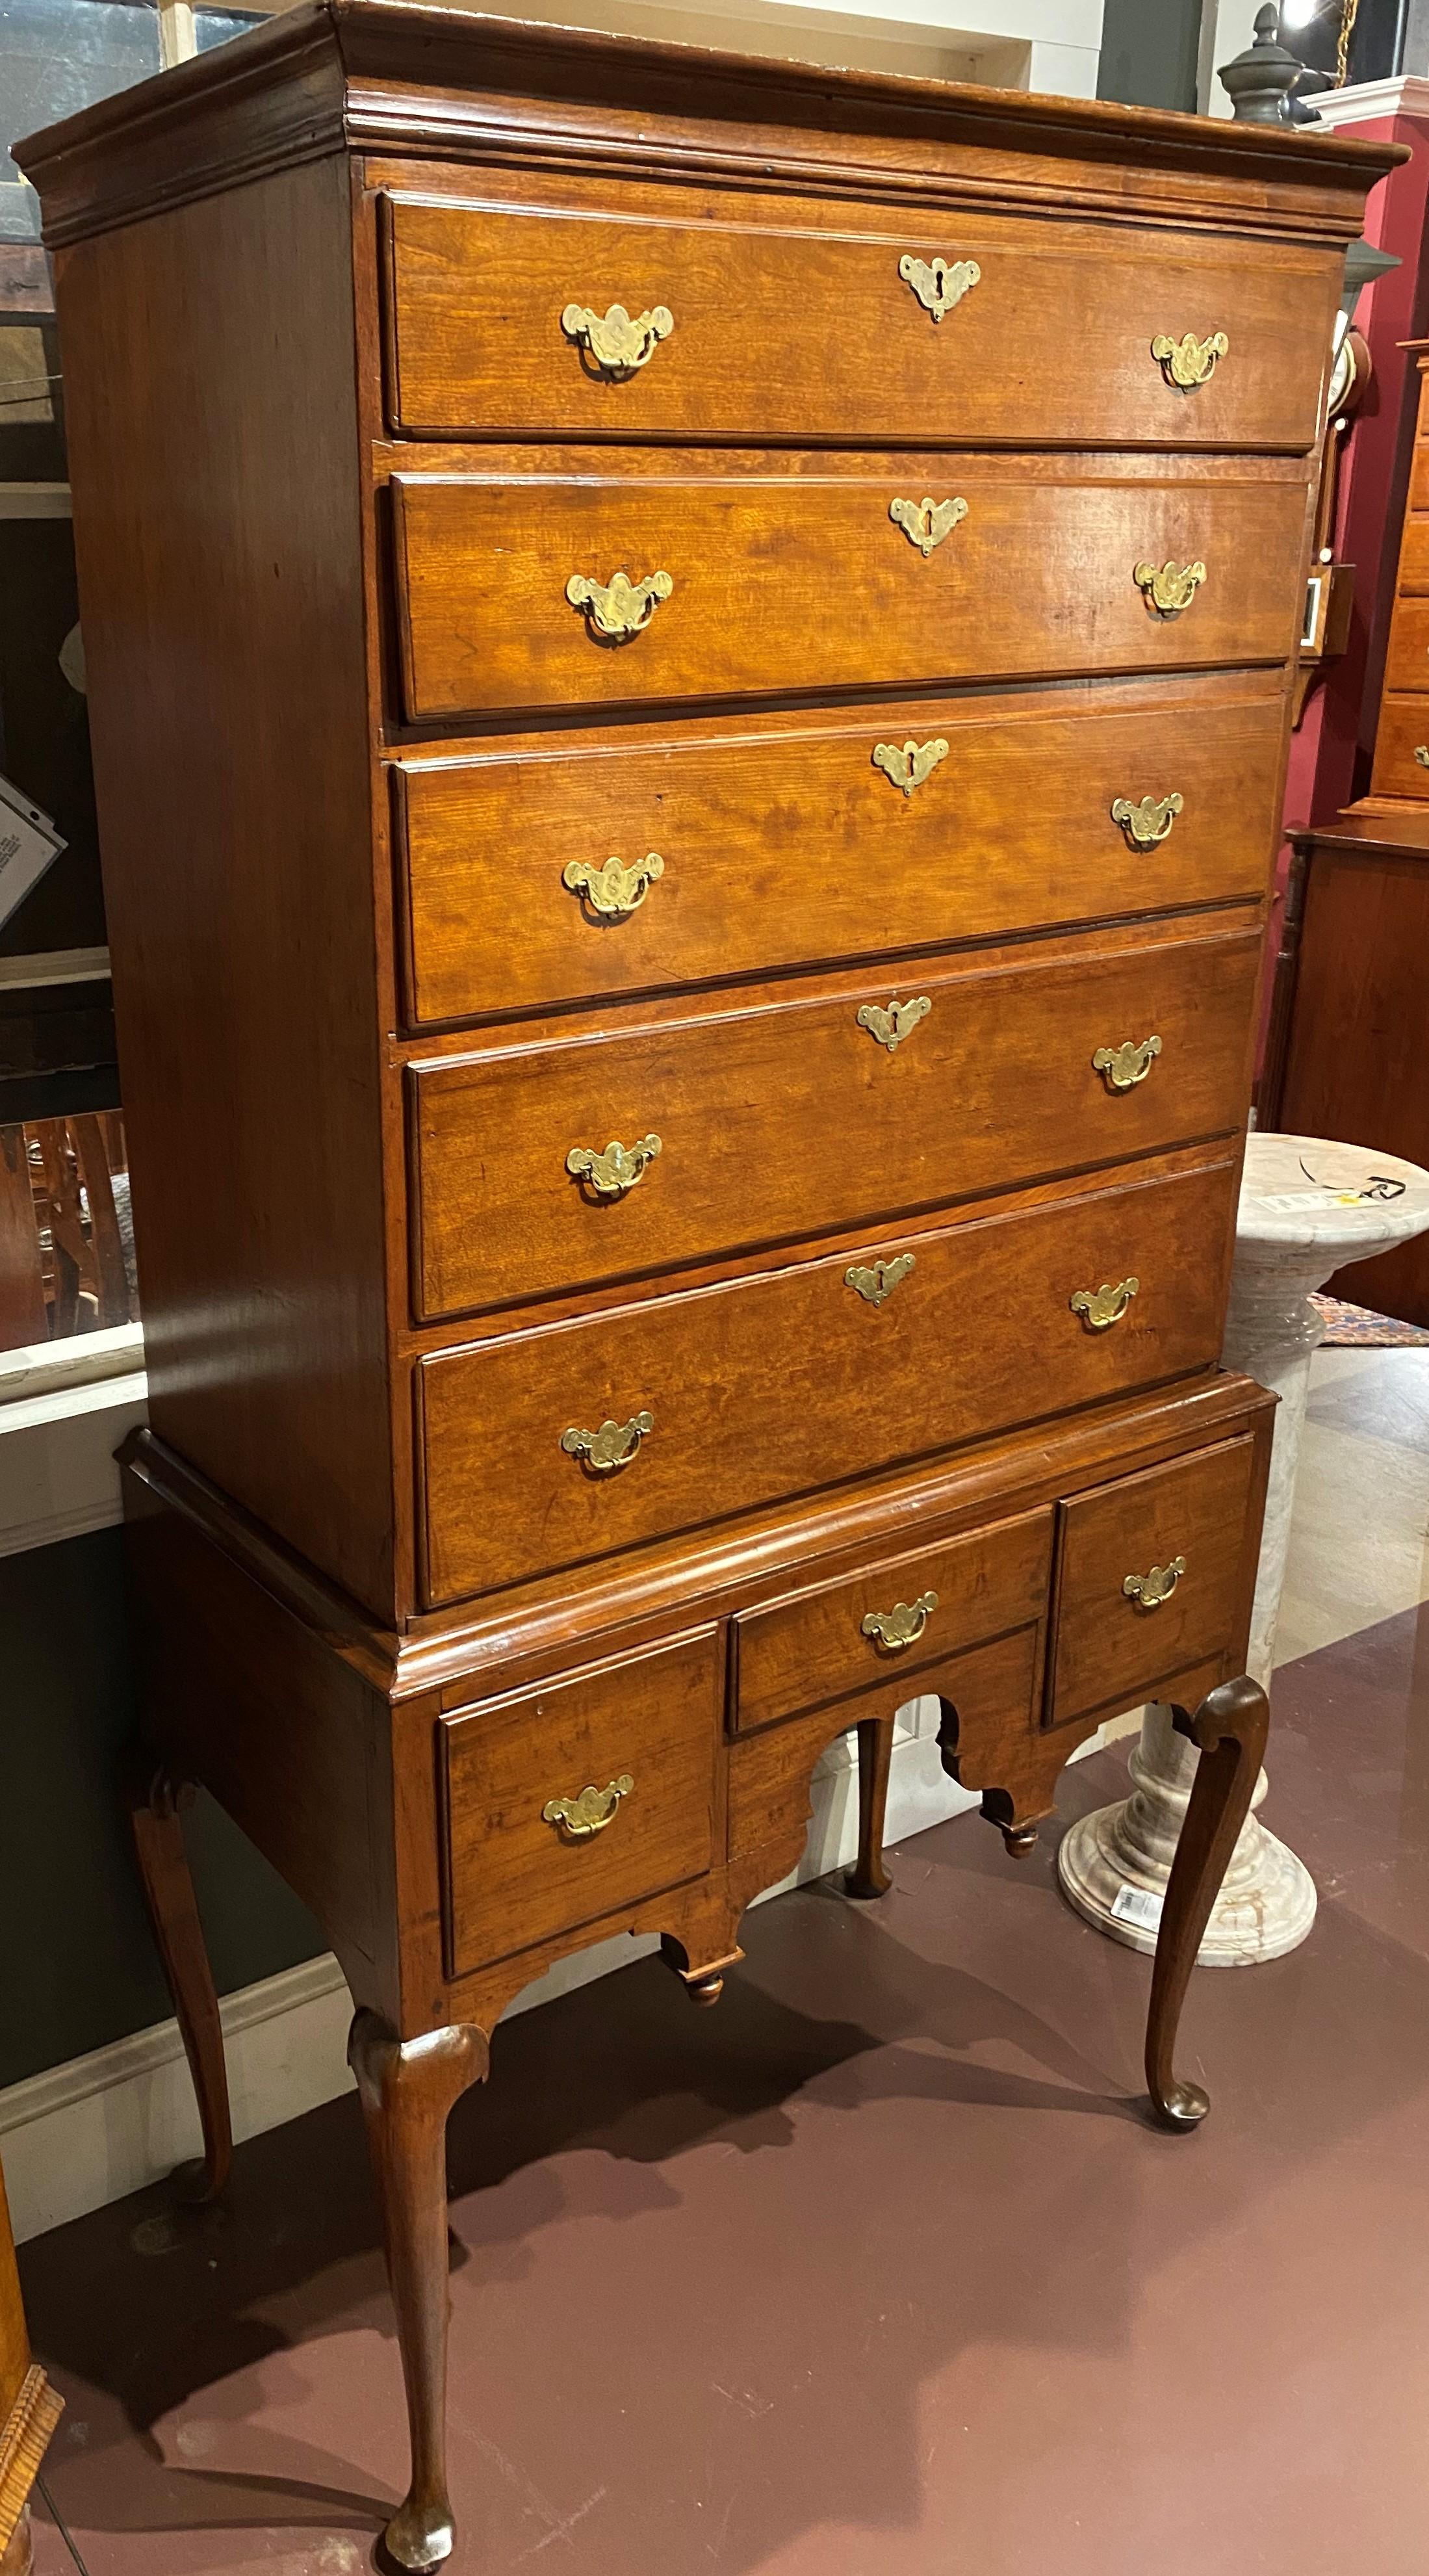 A fine Queen Anne two part highboy with a molded cornice surmounting an upper case with five graduated drawers over an associated lower case with three fitted drawers, all with early engraved batwing brasses with cotter pins. The skirt is nicely